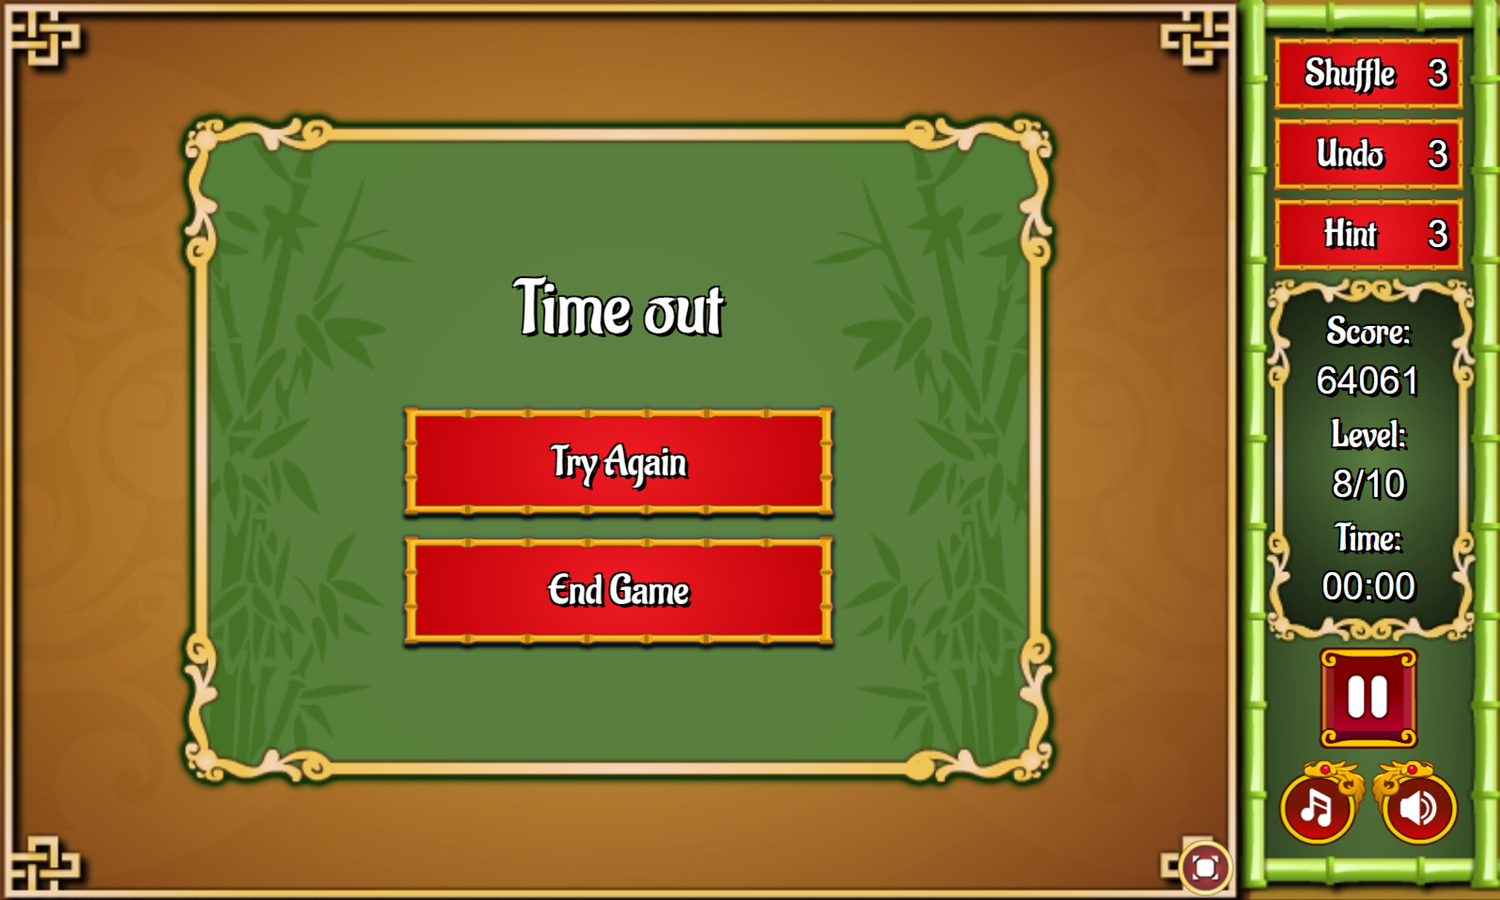 Mahjong Card Solitaire Game Time Out Screenshot.